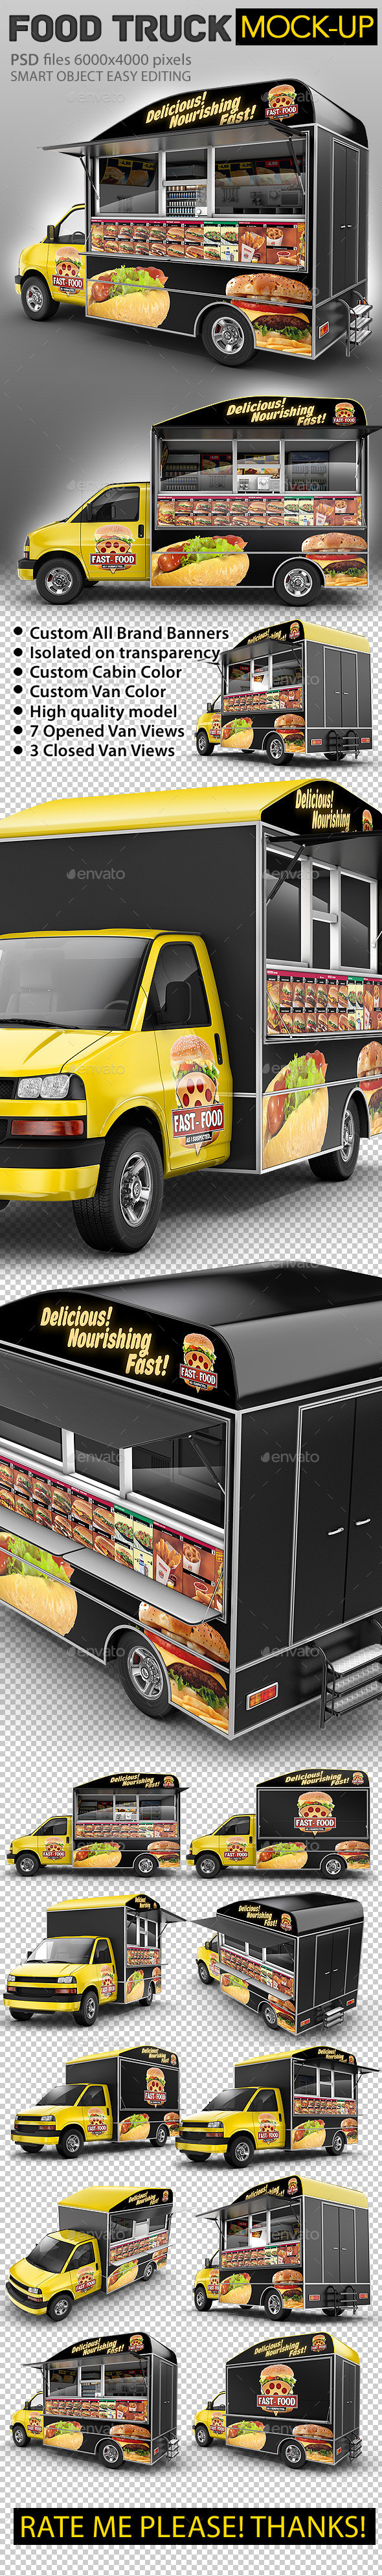 Preview foodtruck